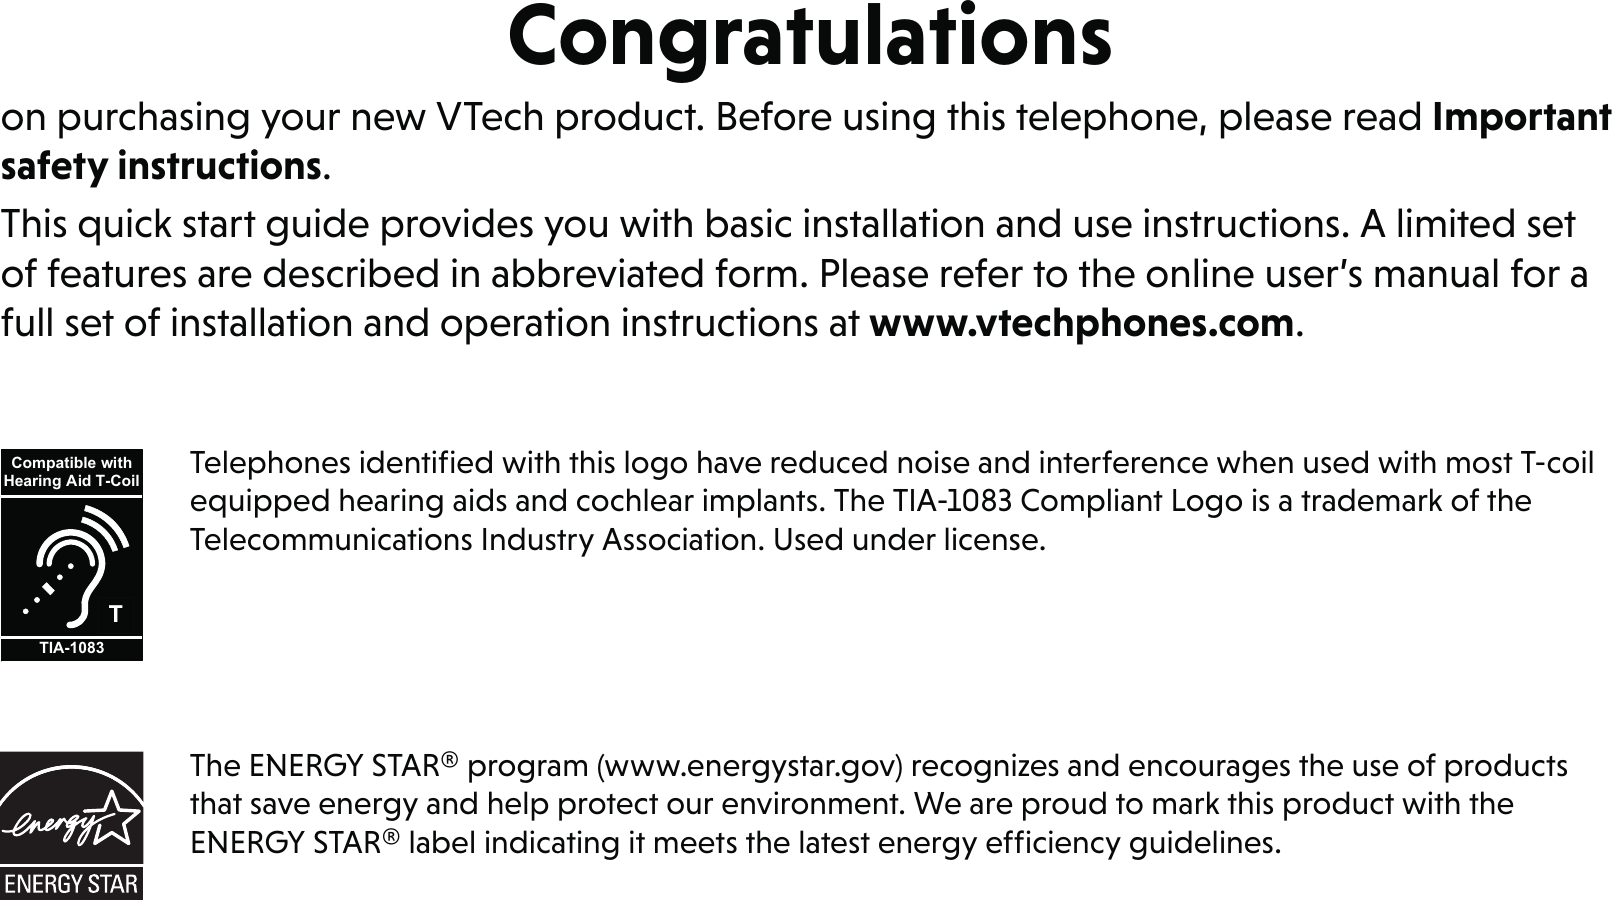 Congratulationson purchasing your new VTech product. Before using this telephone, please read Important safety instructions.This quick start guide provides you with basic installation and use instructions. A limited set of features are described in abbreviated form. Please refer to the online user’s manual for a full set of installation and operation instructions at www.vtechphones.com.Telephones identiﬁed with this logo have reduced noise and interference when used with most T-coil equipped hearing aids and cochlear implants. The TIA-1083 Compliant Logo is a trademark of the Telecommunications Industry Association. Used under license.TCompatible withHearing Aid T-CoilTIA-1083The ENERGY STAR® program (www.energystar.gov) recognizes and encourages the use of products that save energy and help protect our environment. We are proud to mark this product with the ENERGY STAR® label indicating it meets the latest energy efﬁciency guidelines.